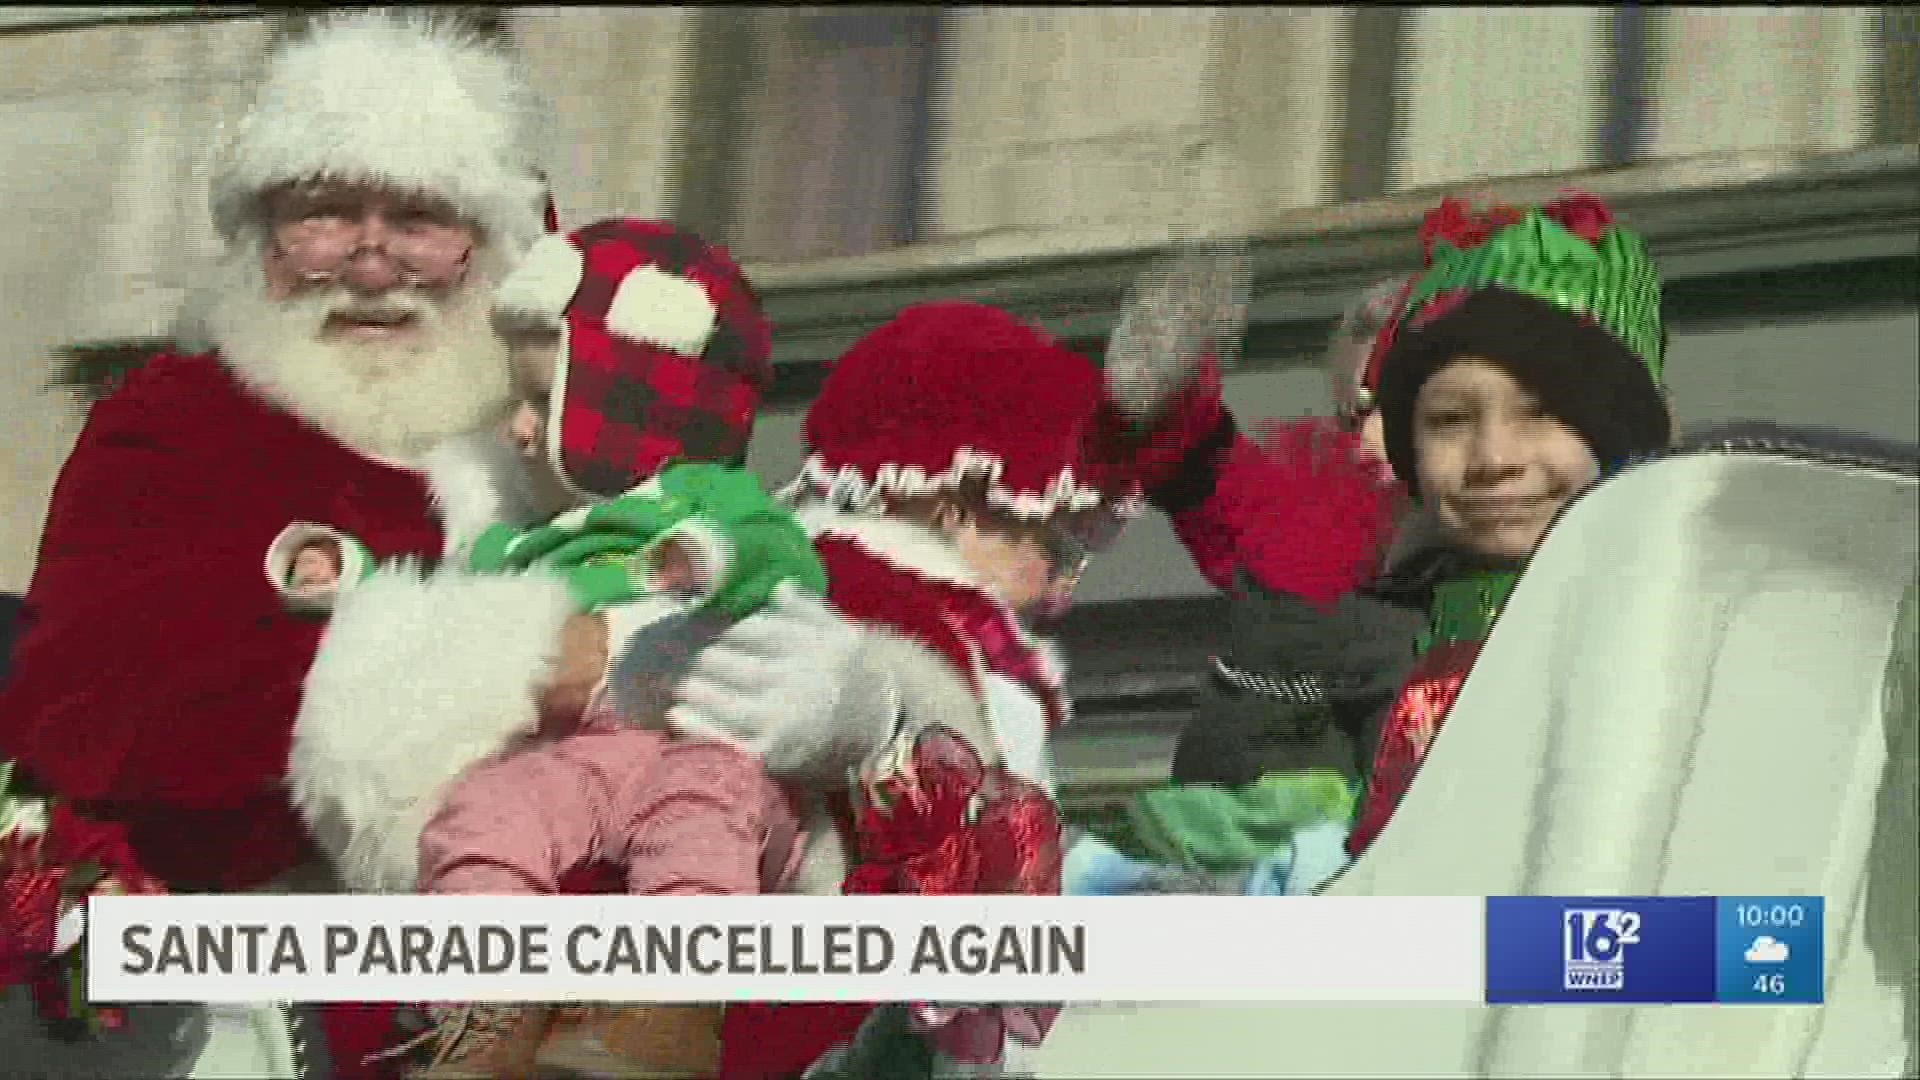 Scranton's famed holiday parade is cancelled for the second straight year. Residents and parade organizers are disappointed.